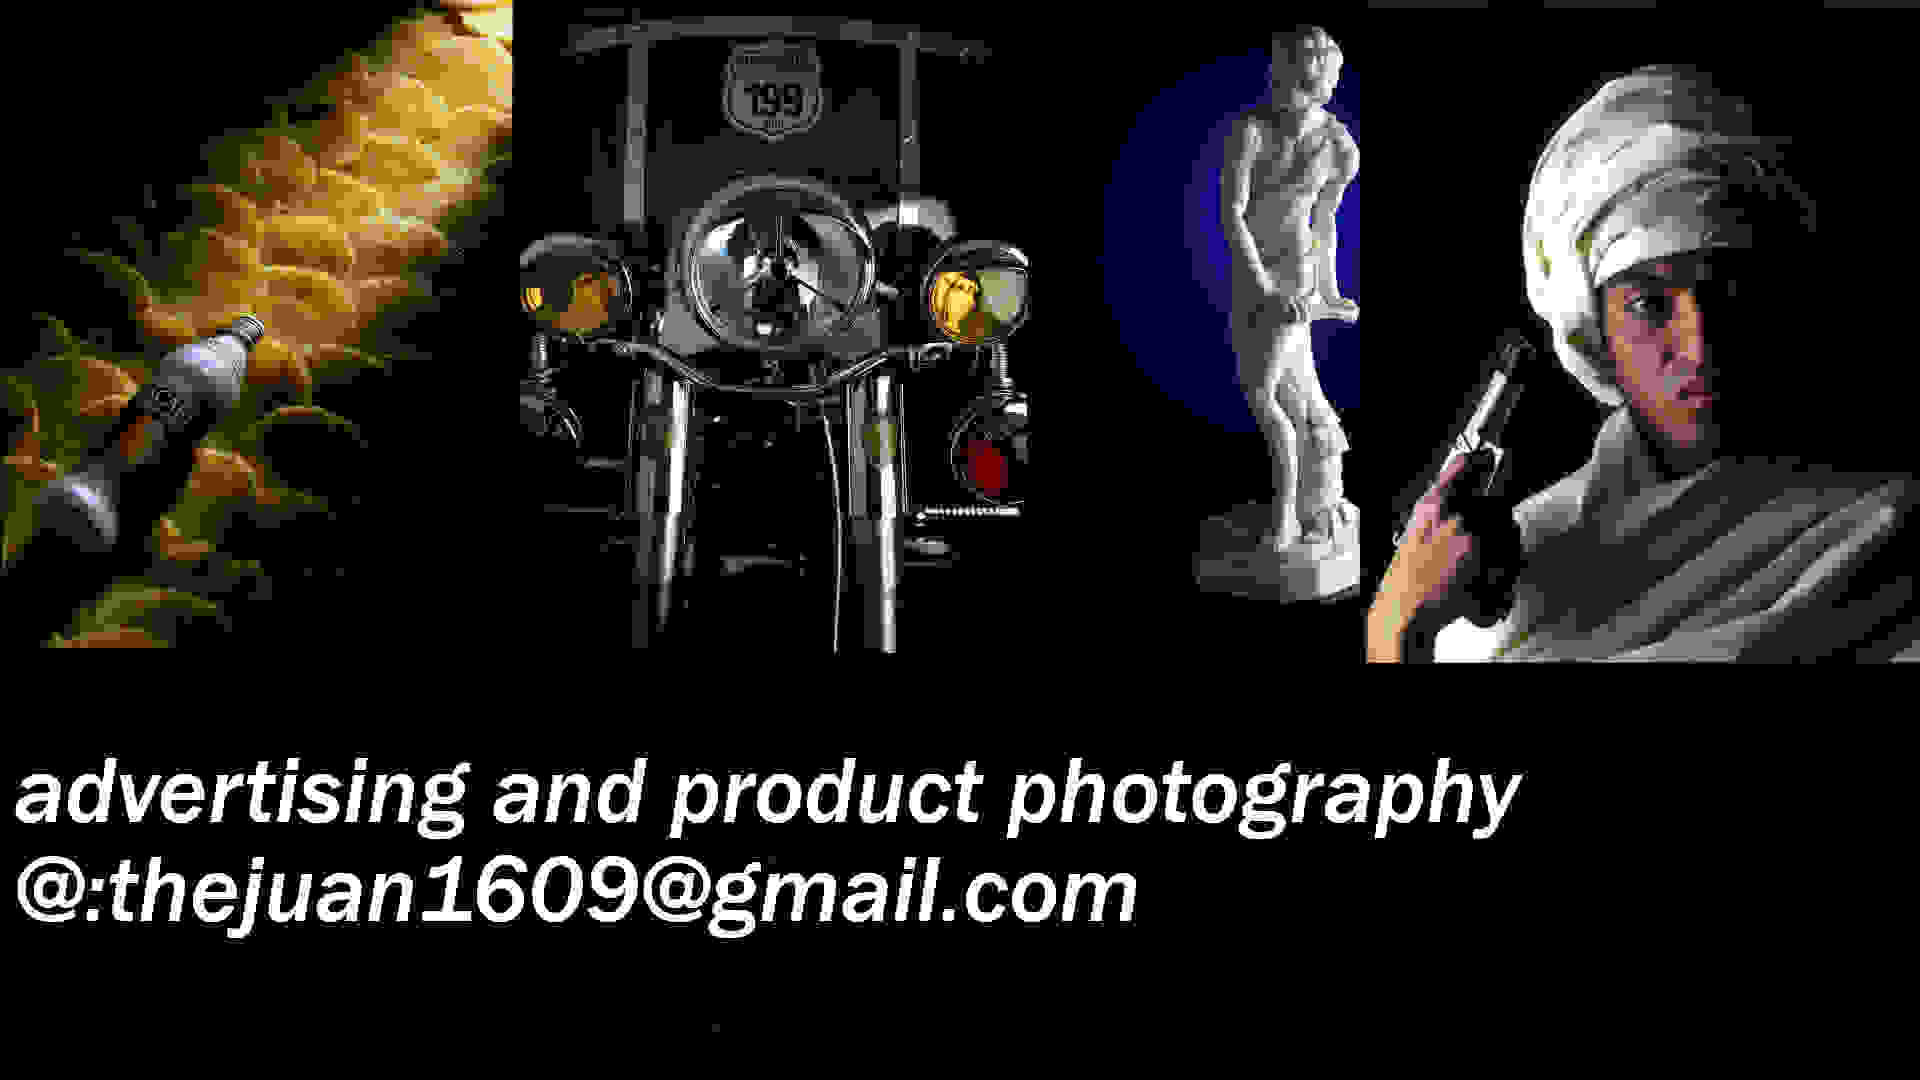 advertising and product photography
@:thejuan1609@gmail.com